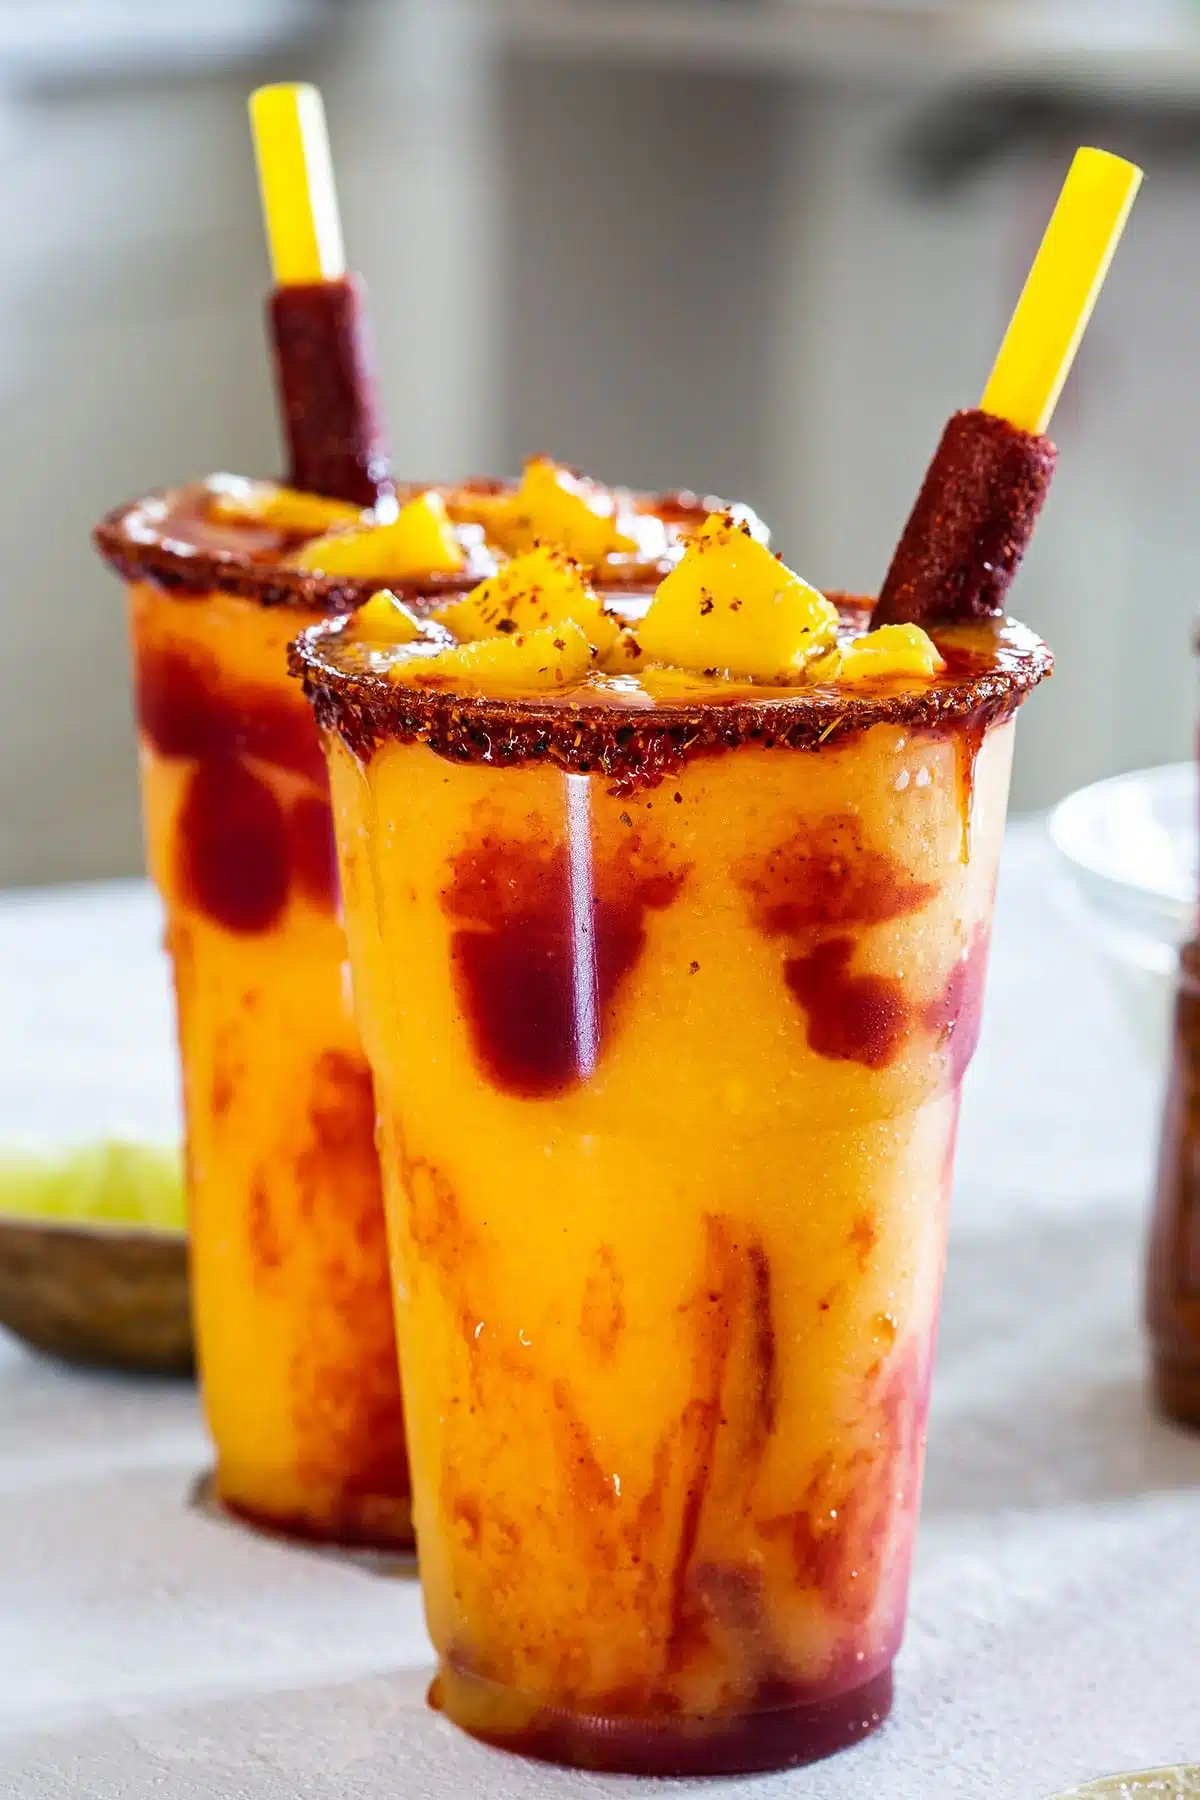 Two cups with mangonada.